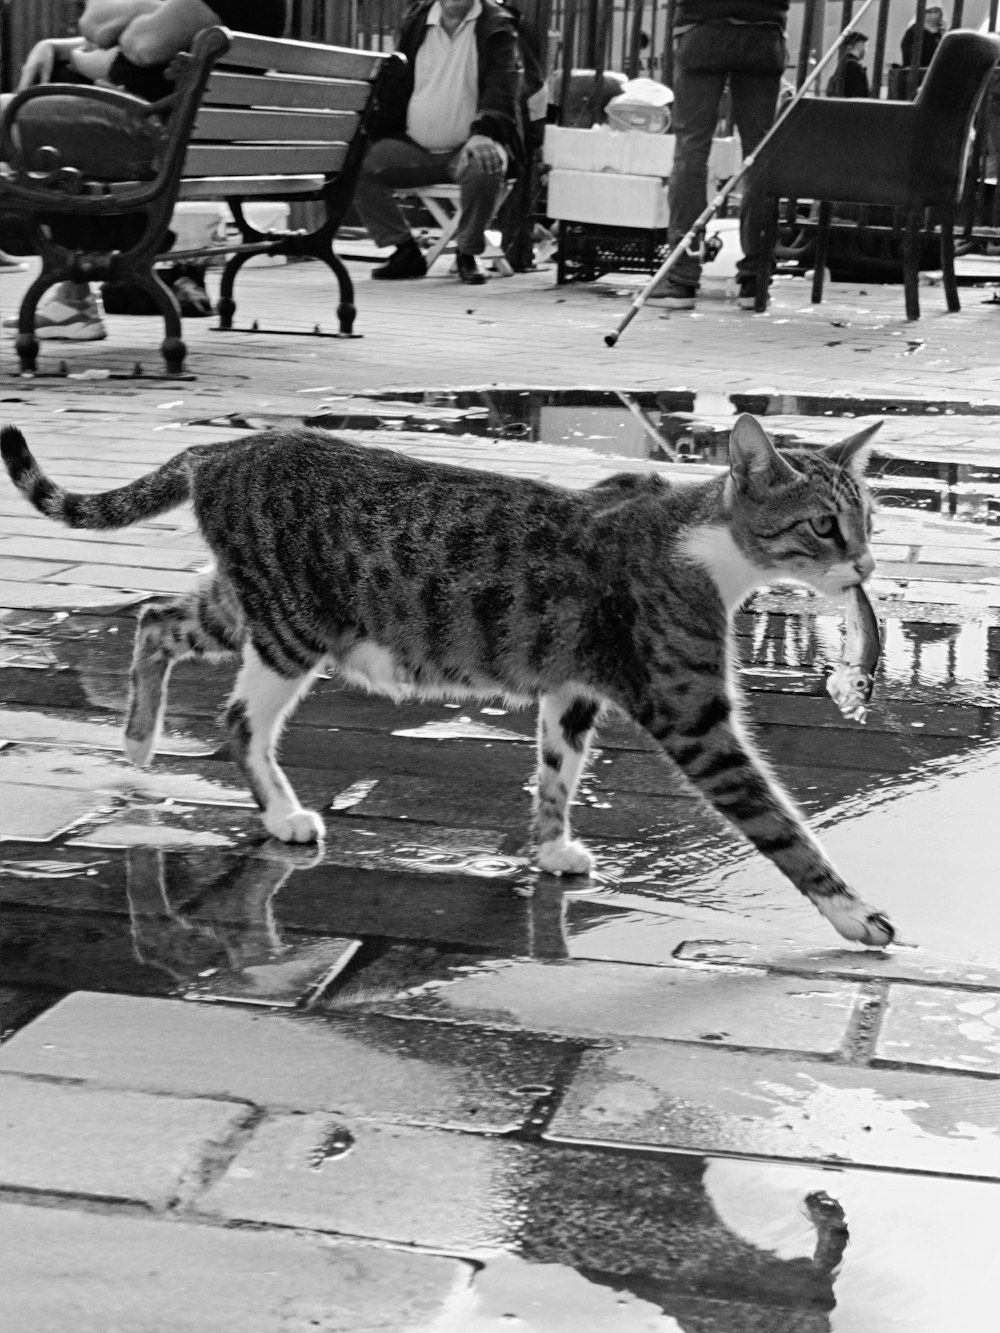 a cat walking across a puddle of water